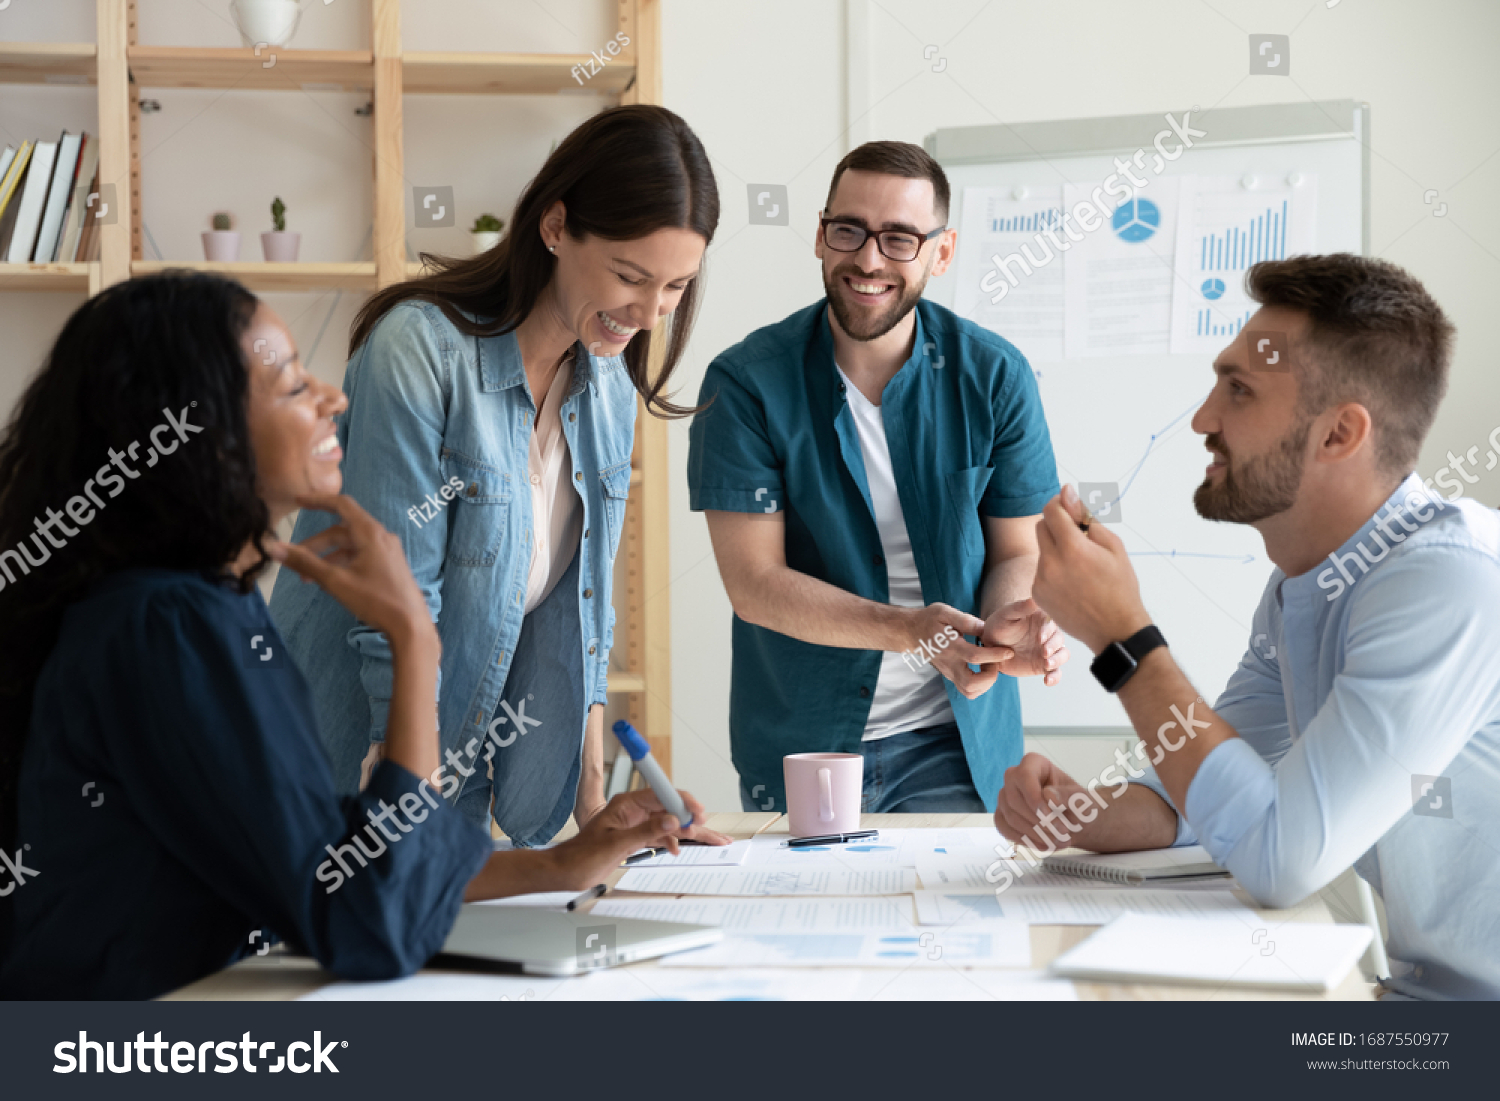 Smiling diverse colleagues gather in boardroom brainstorm discuss financial statistics together, happy multiracial coworkers have fun cooperating working together at office meeting, teamwork concept #1687550977